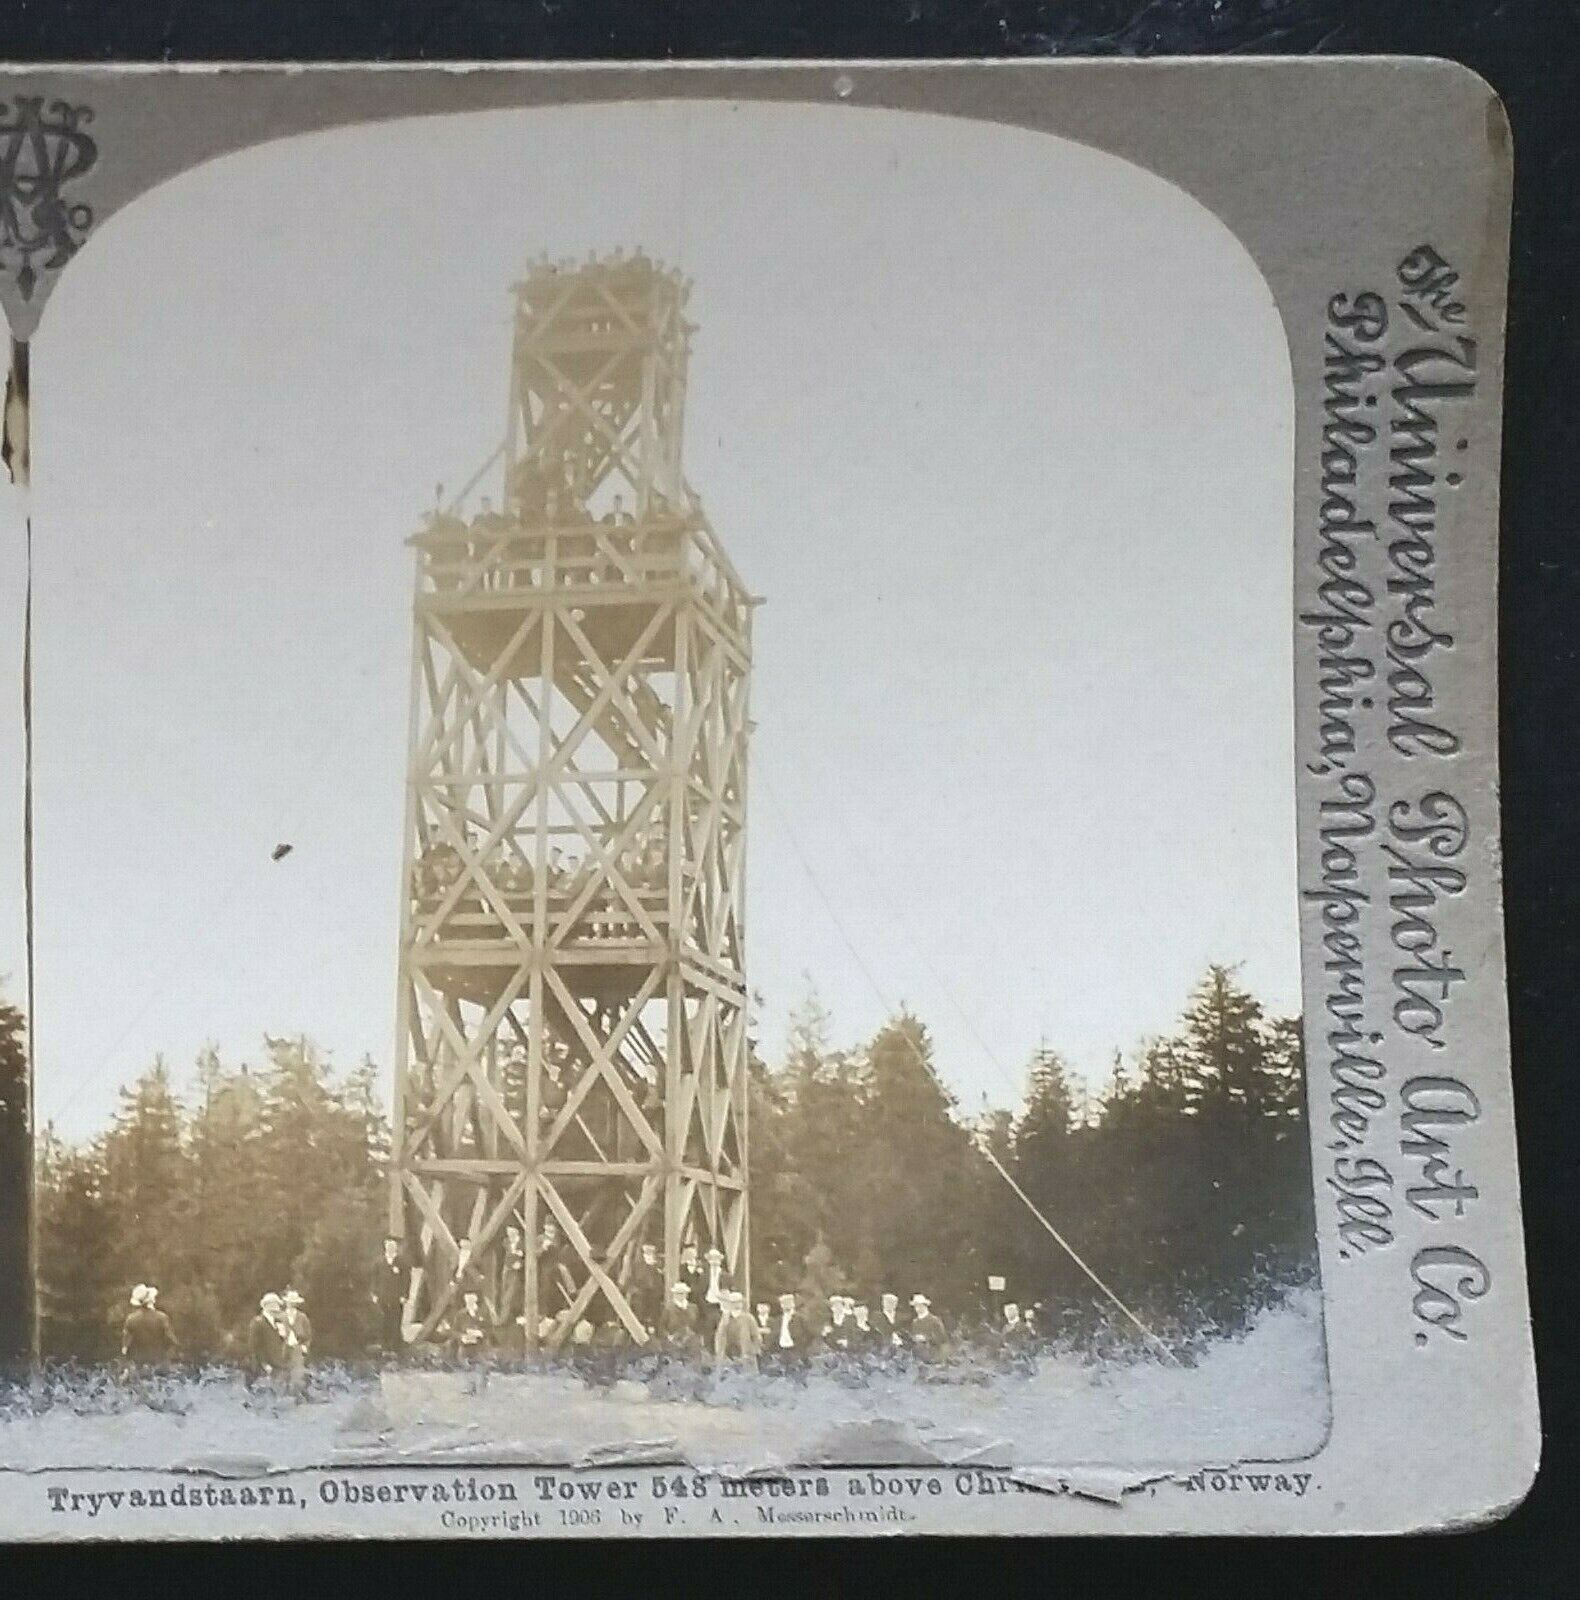 1906 Tryvandstaarn Observation Tower Above Christiania (Oslo), Norway Stereoview